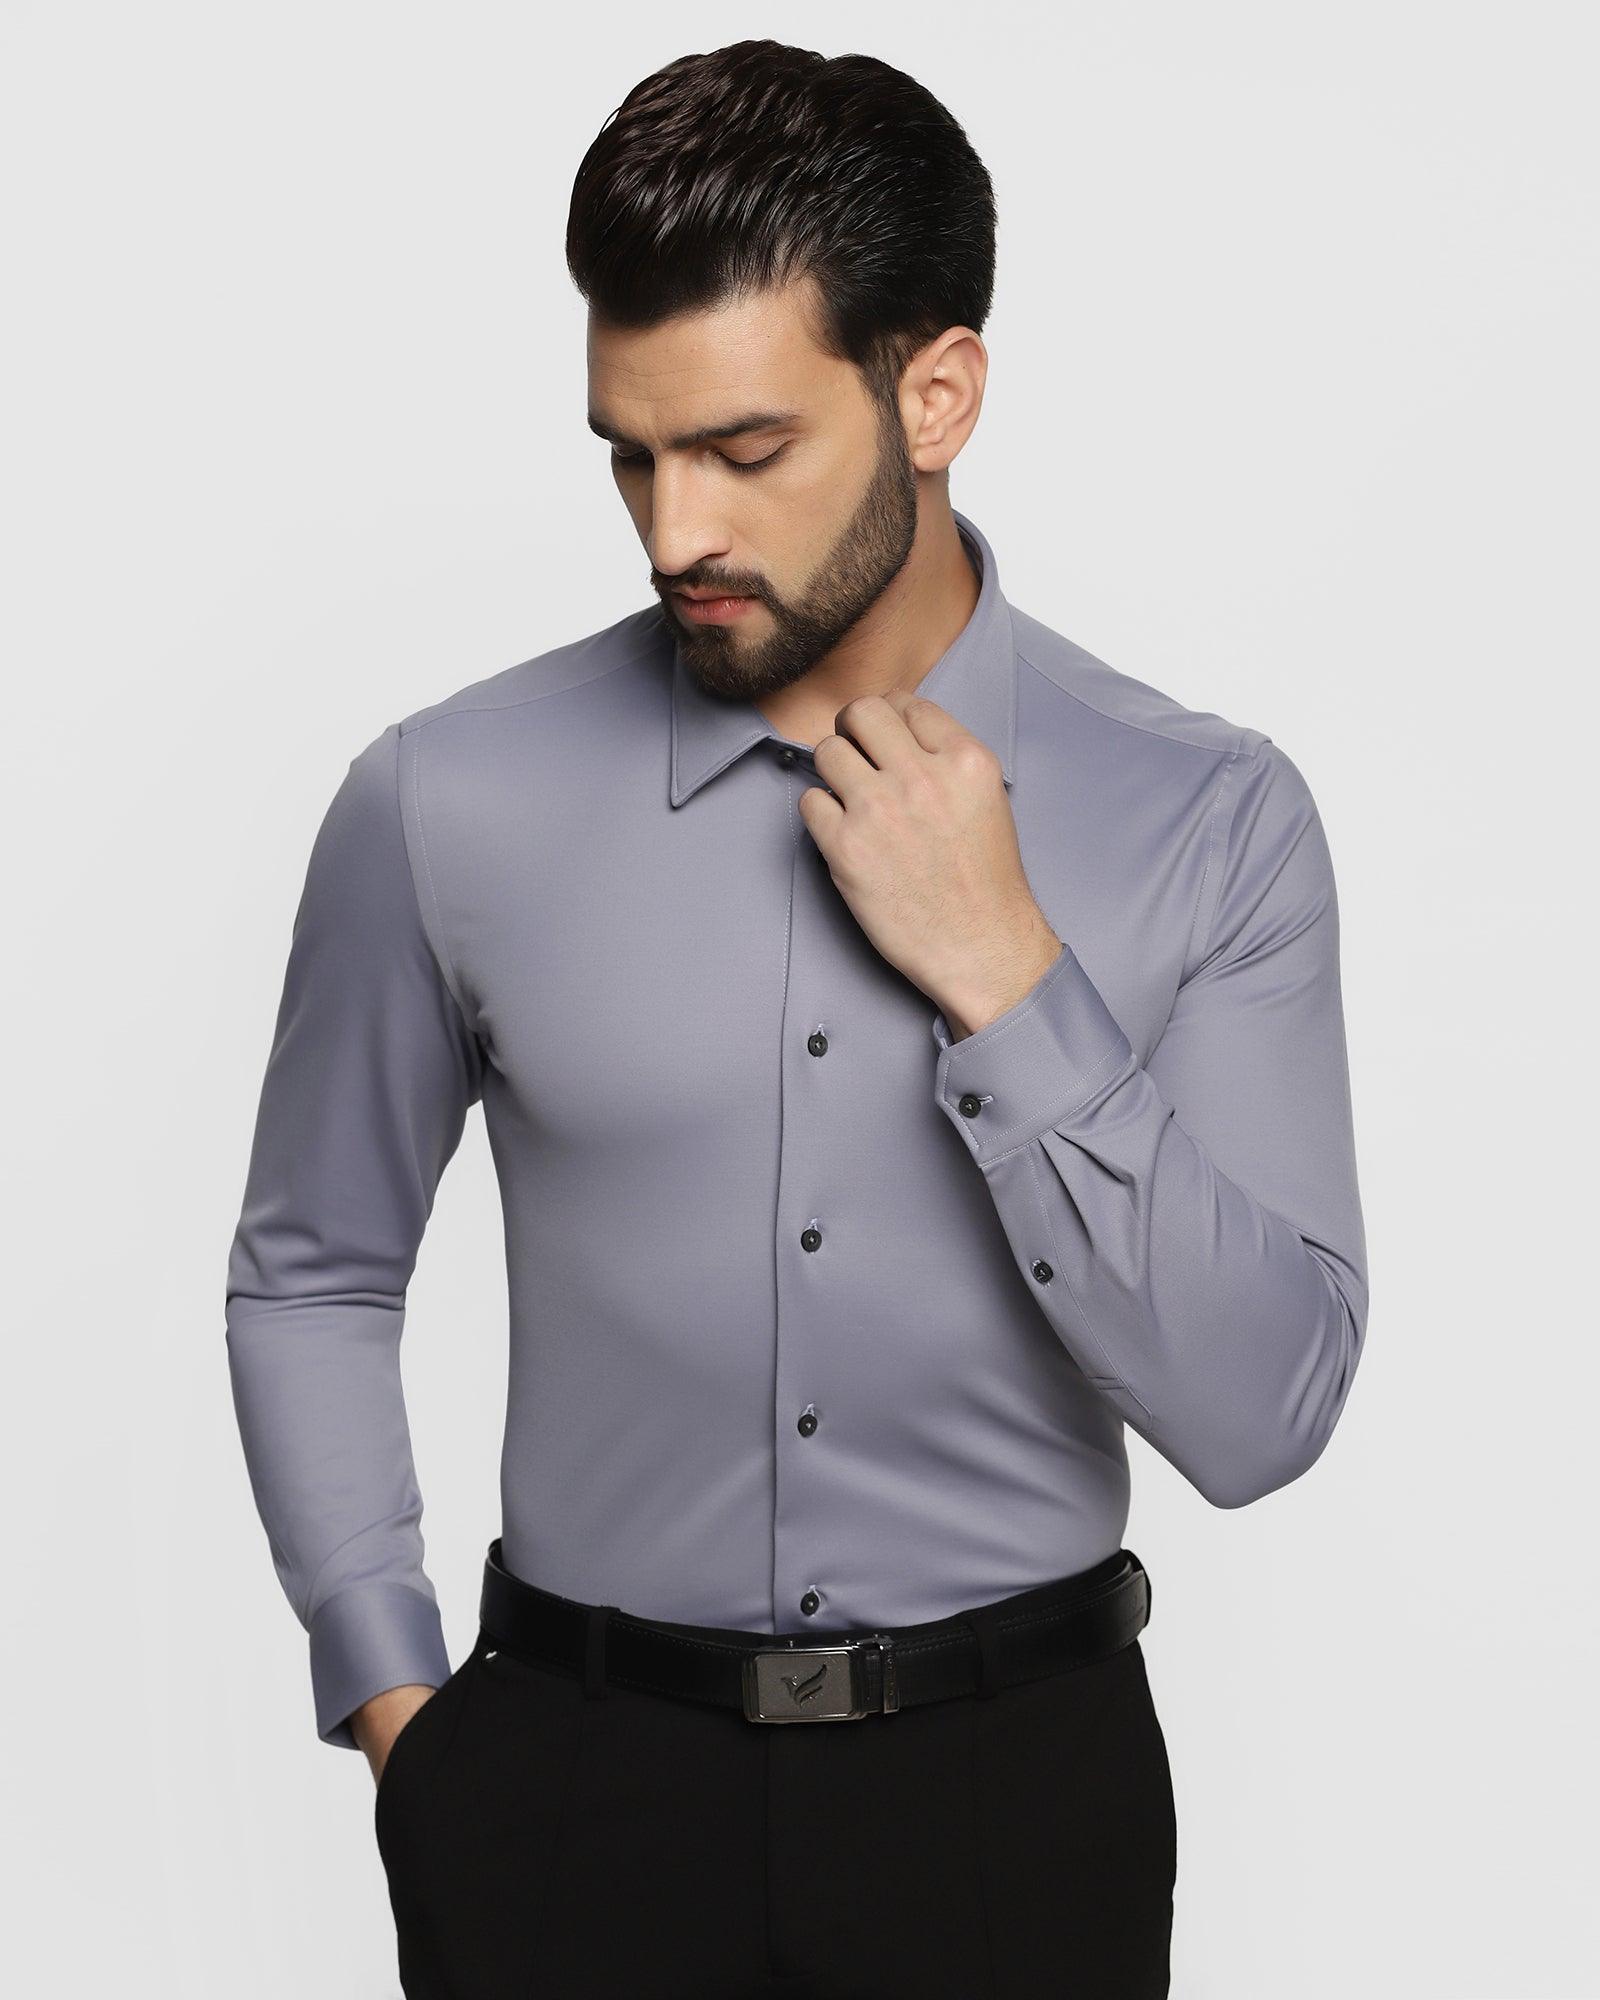 TechPro Formal Shirt In Grey (Payback)